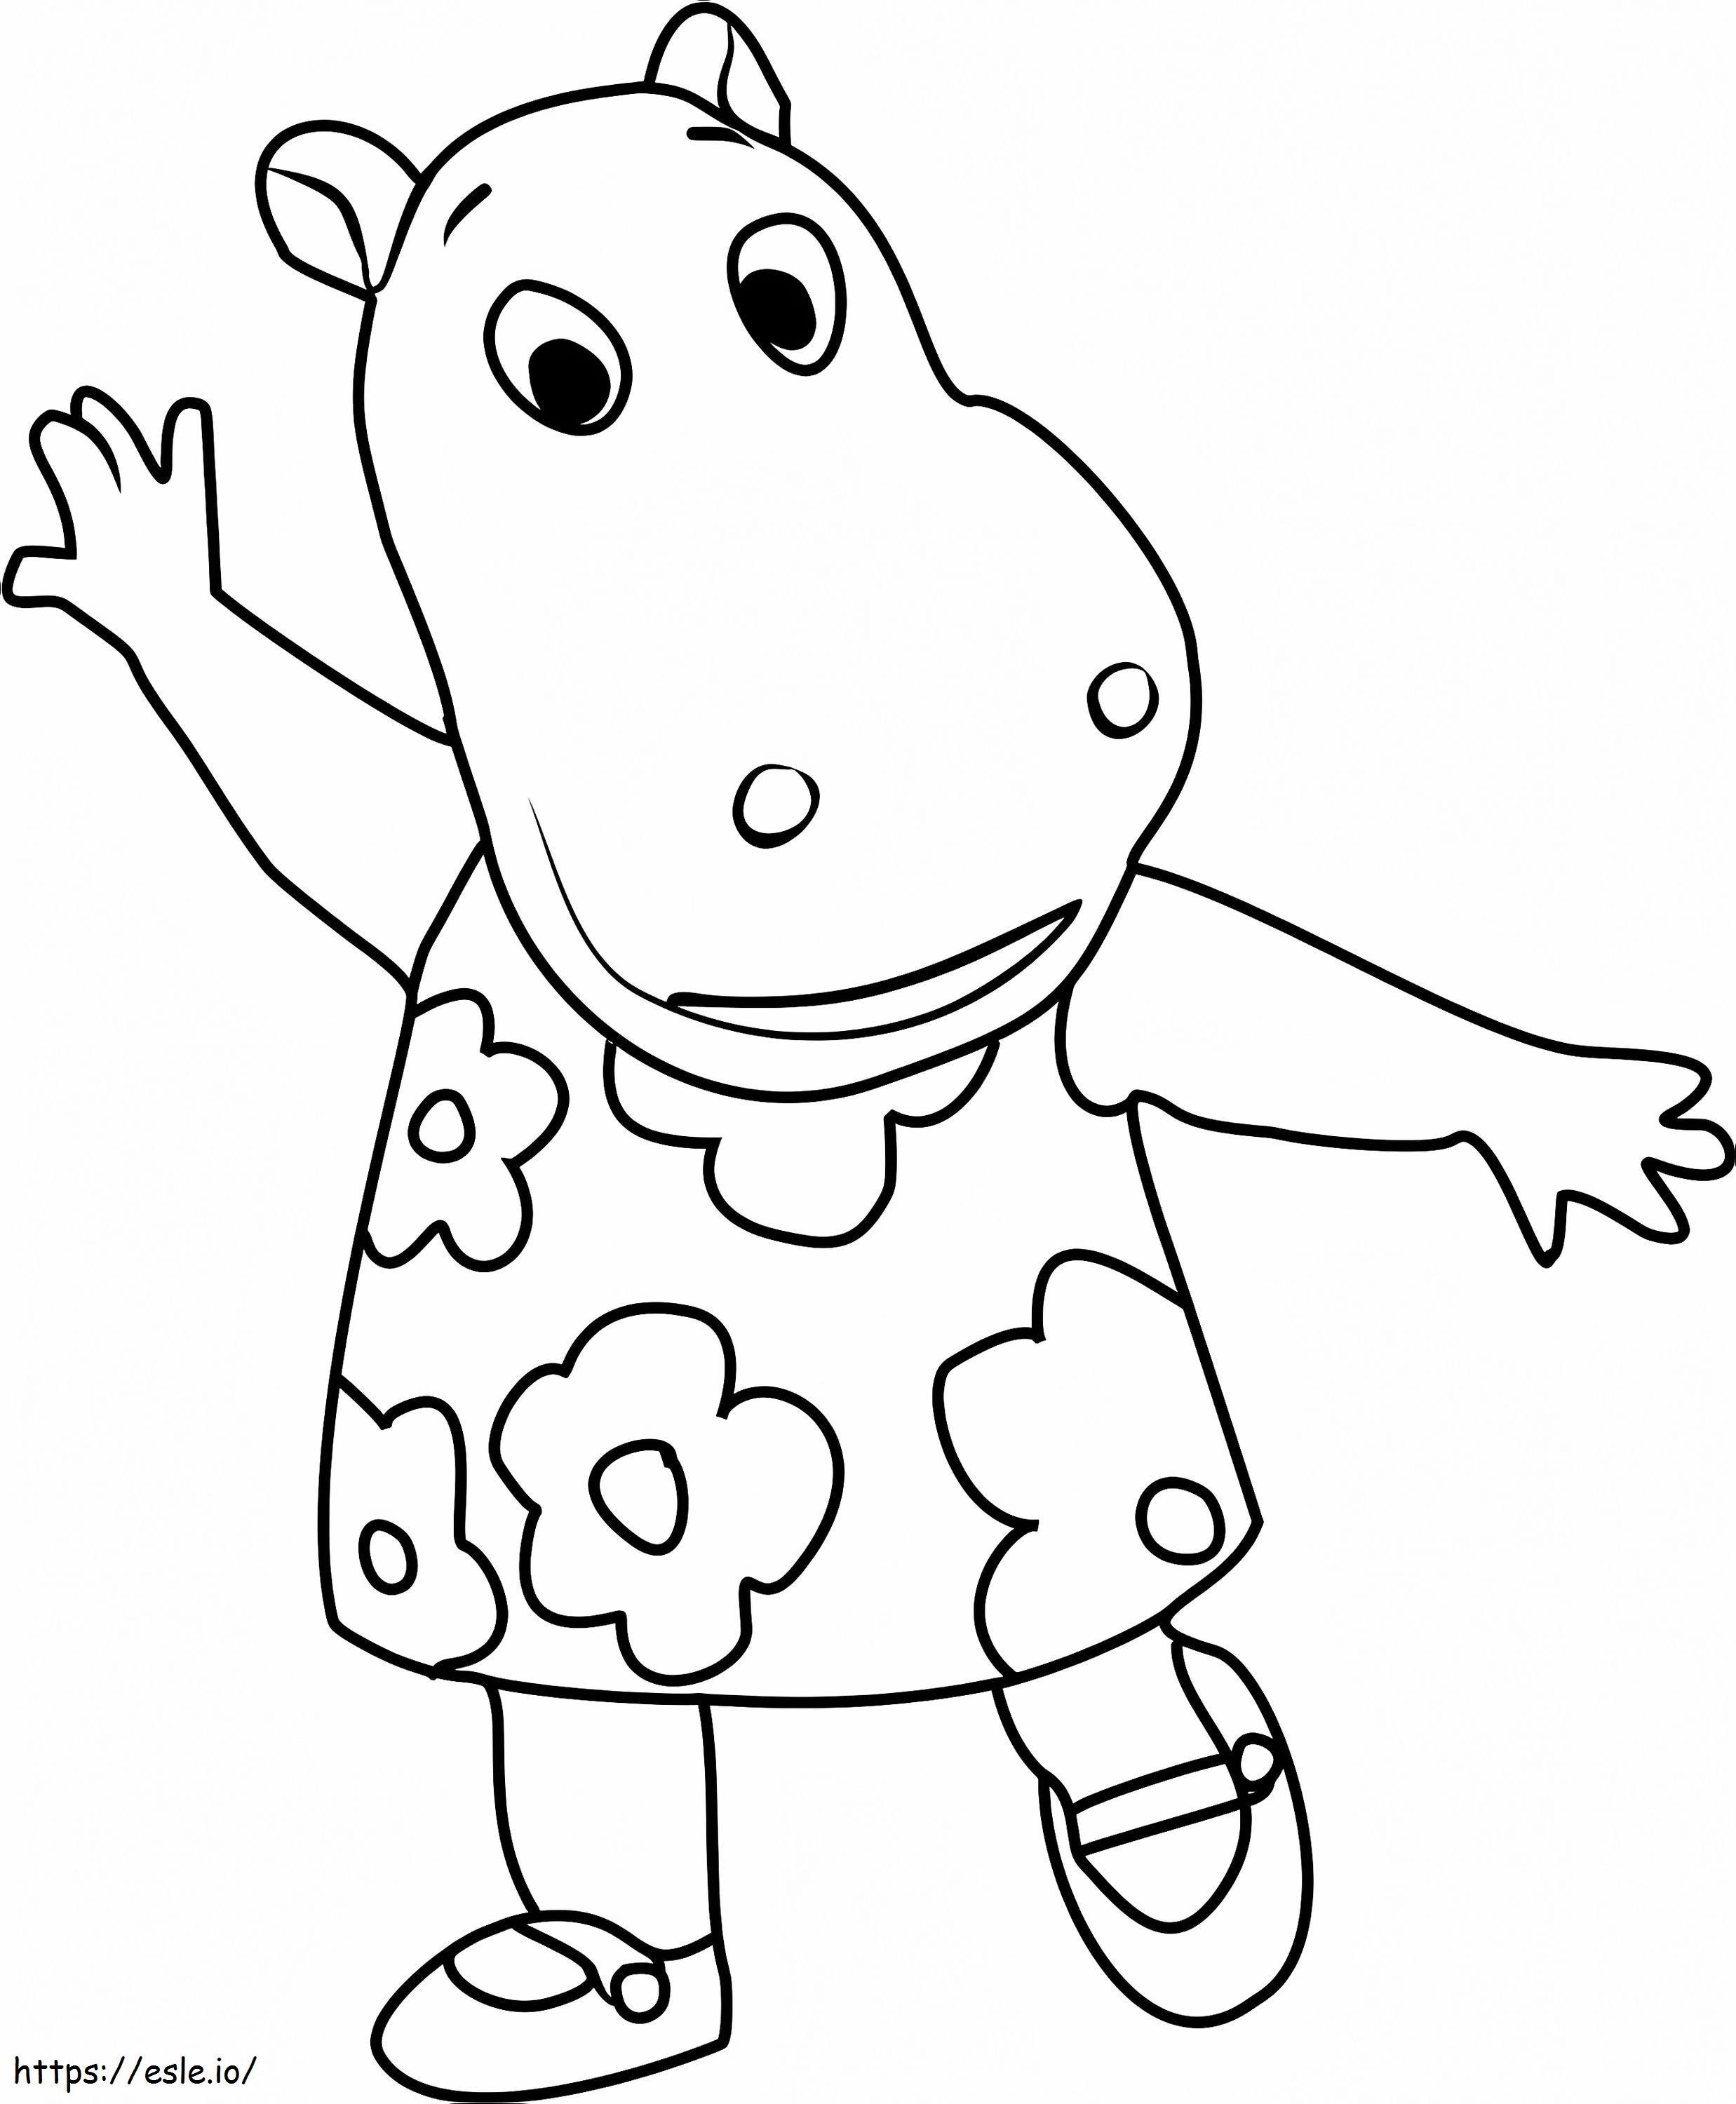 Stop Dancing A4 coloring page